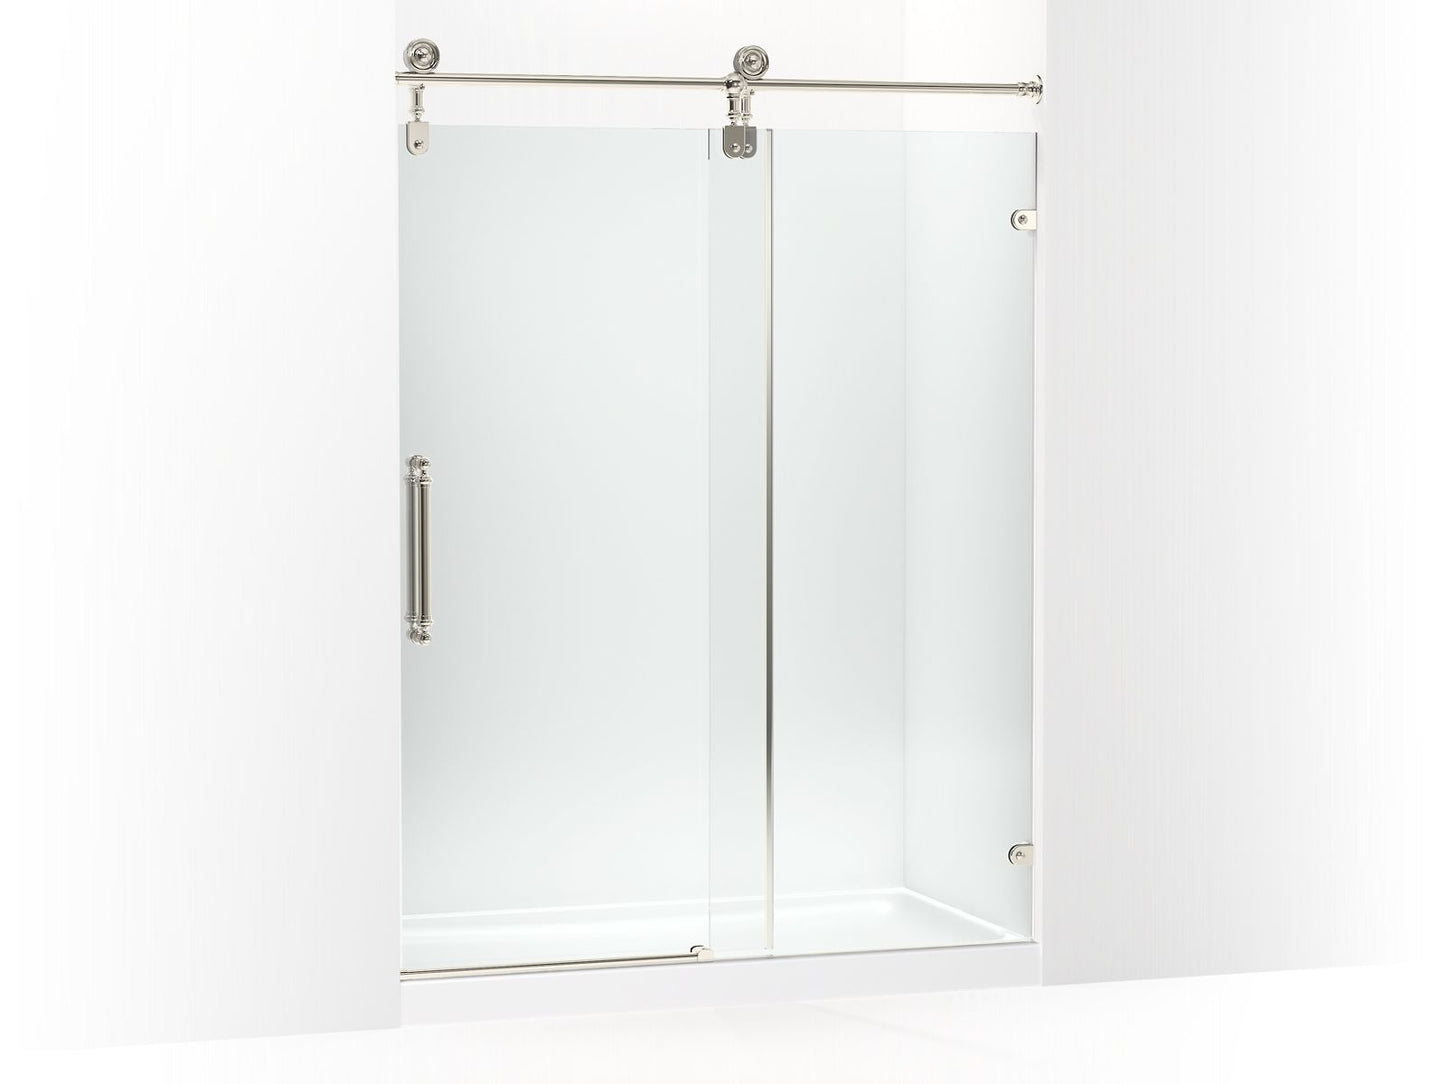 KOHLER K-701724-10L-SN Artifacts 80-7/8" H Sliding Shower Door With 3/8"-Thick Glass In Vibrant Polished Nickel